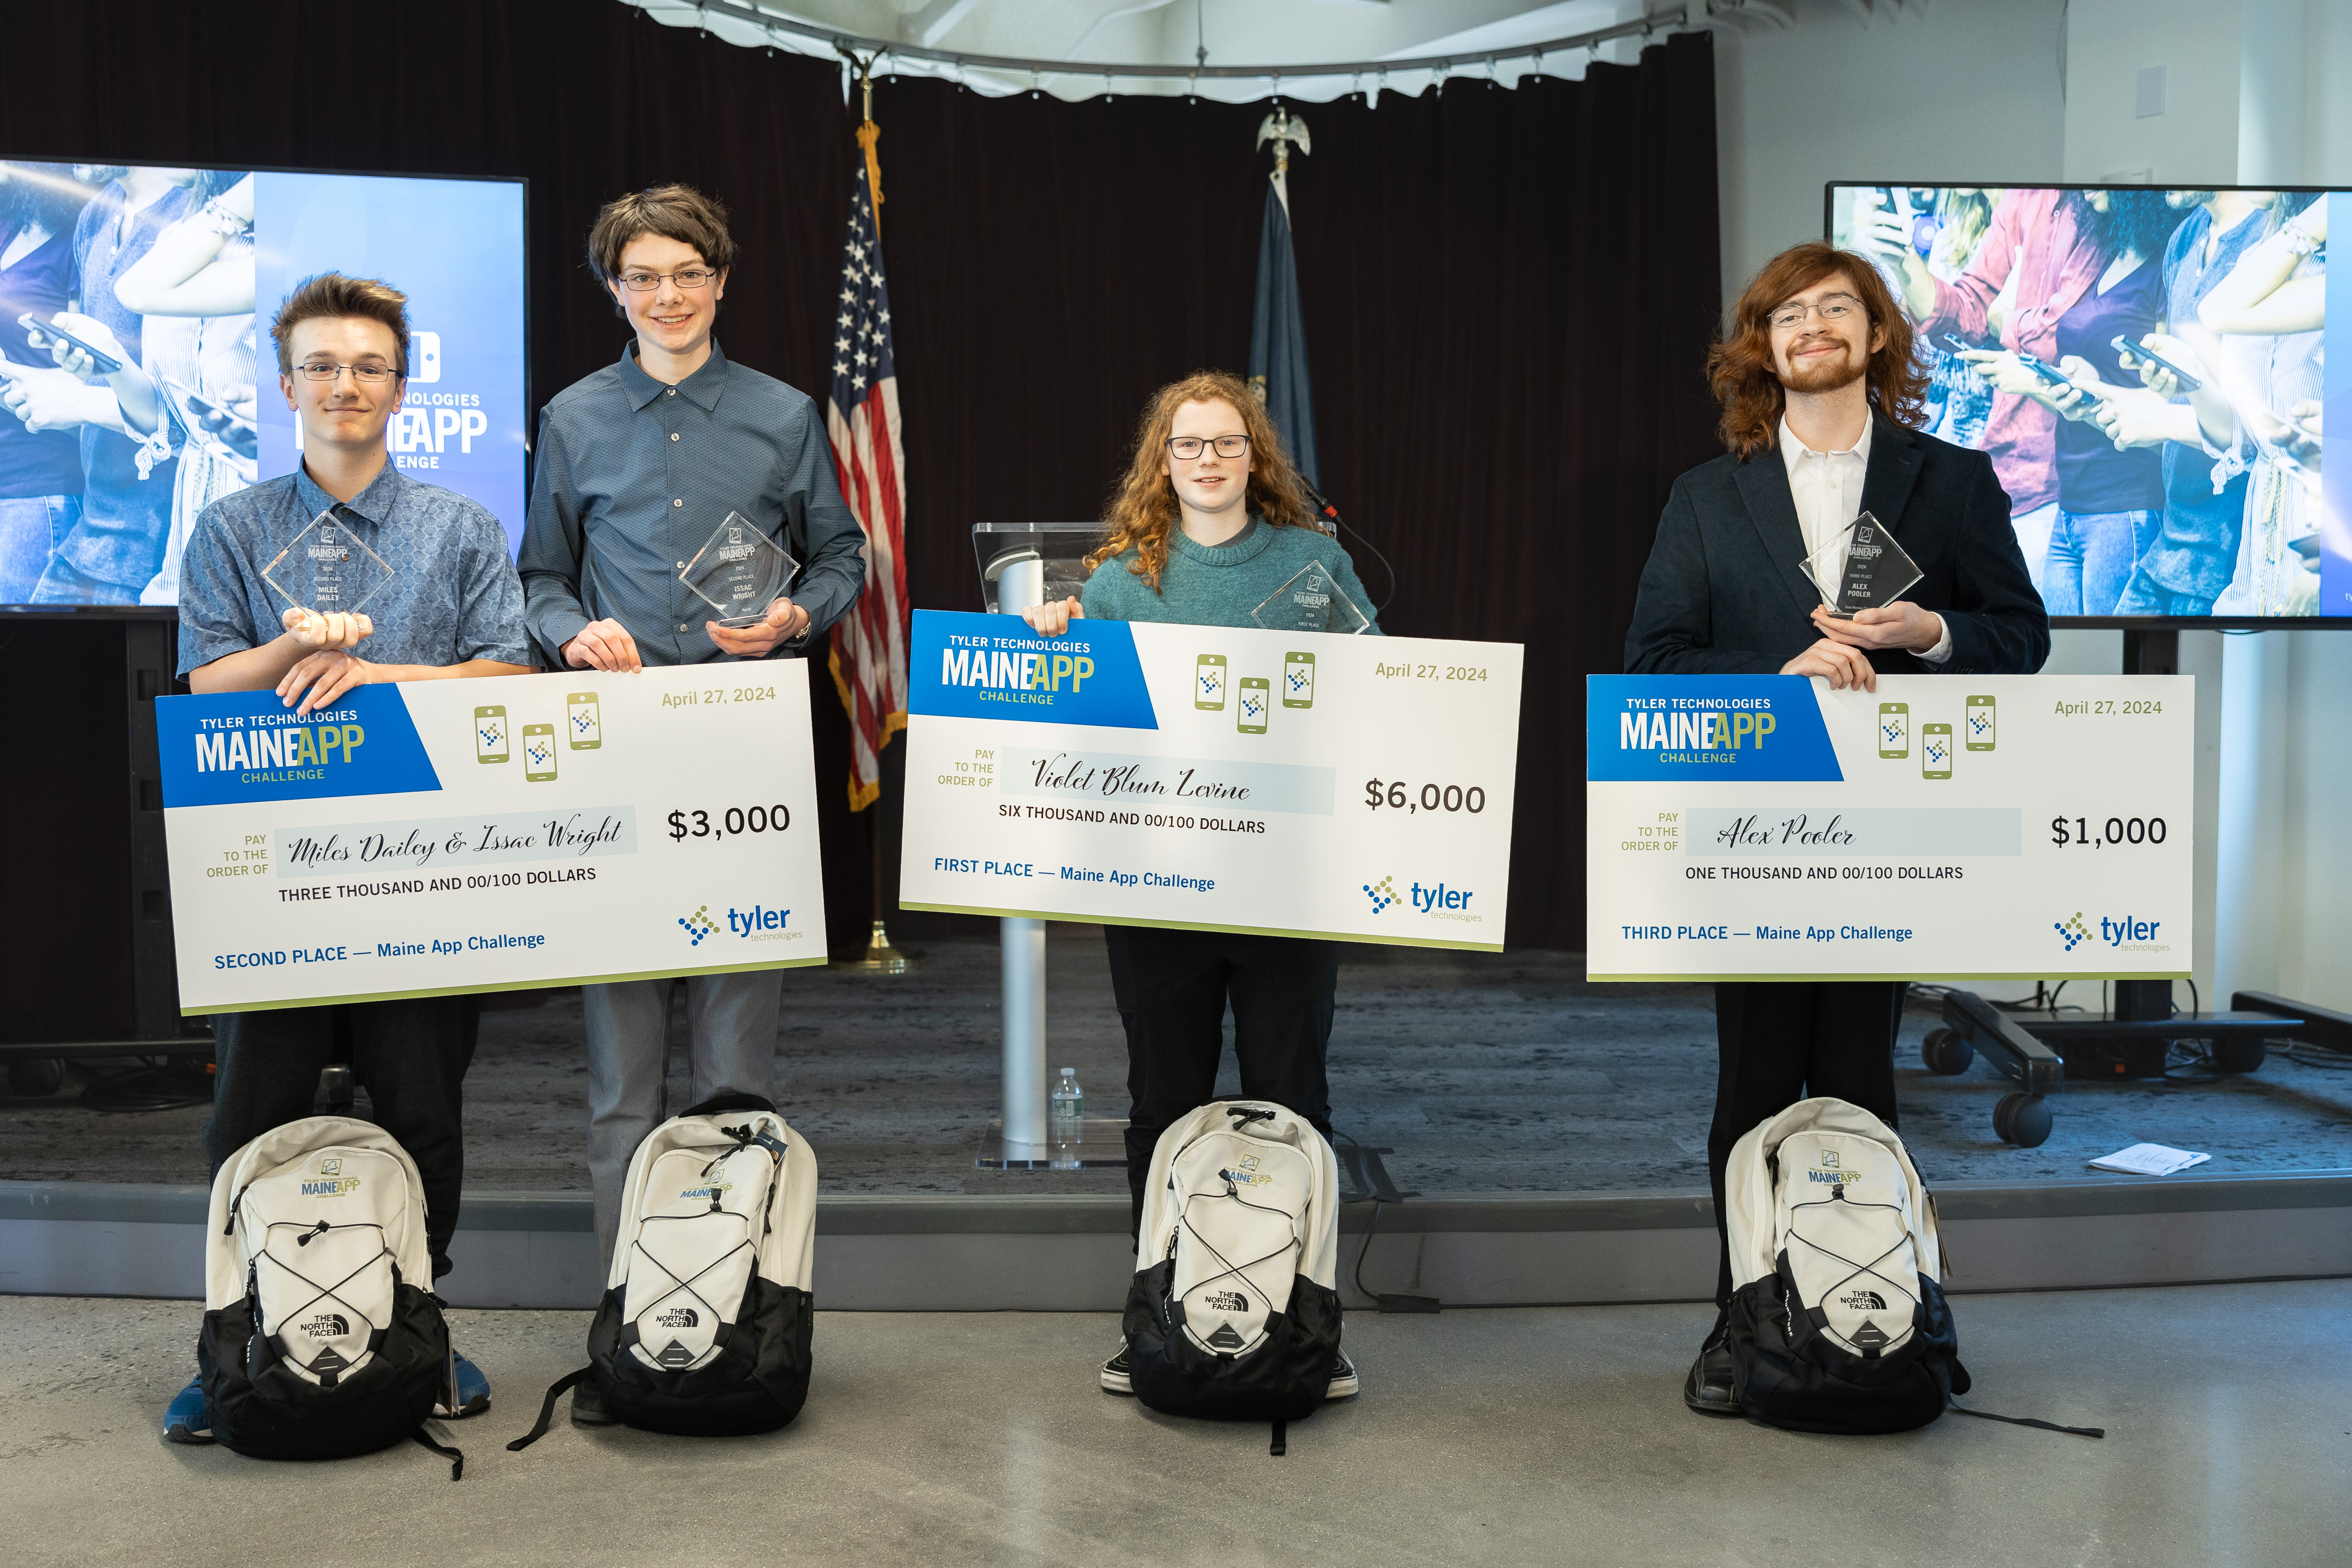 The Maine App Challenge winners pose with their prizes.